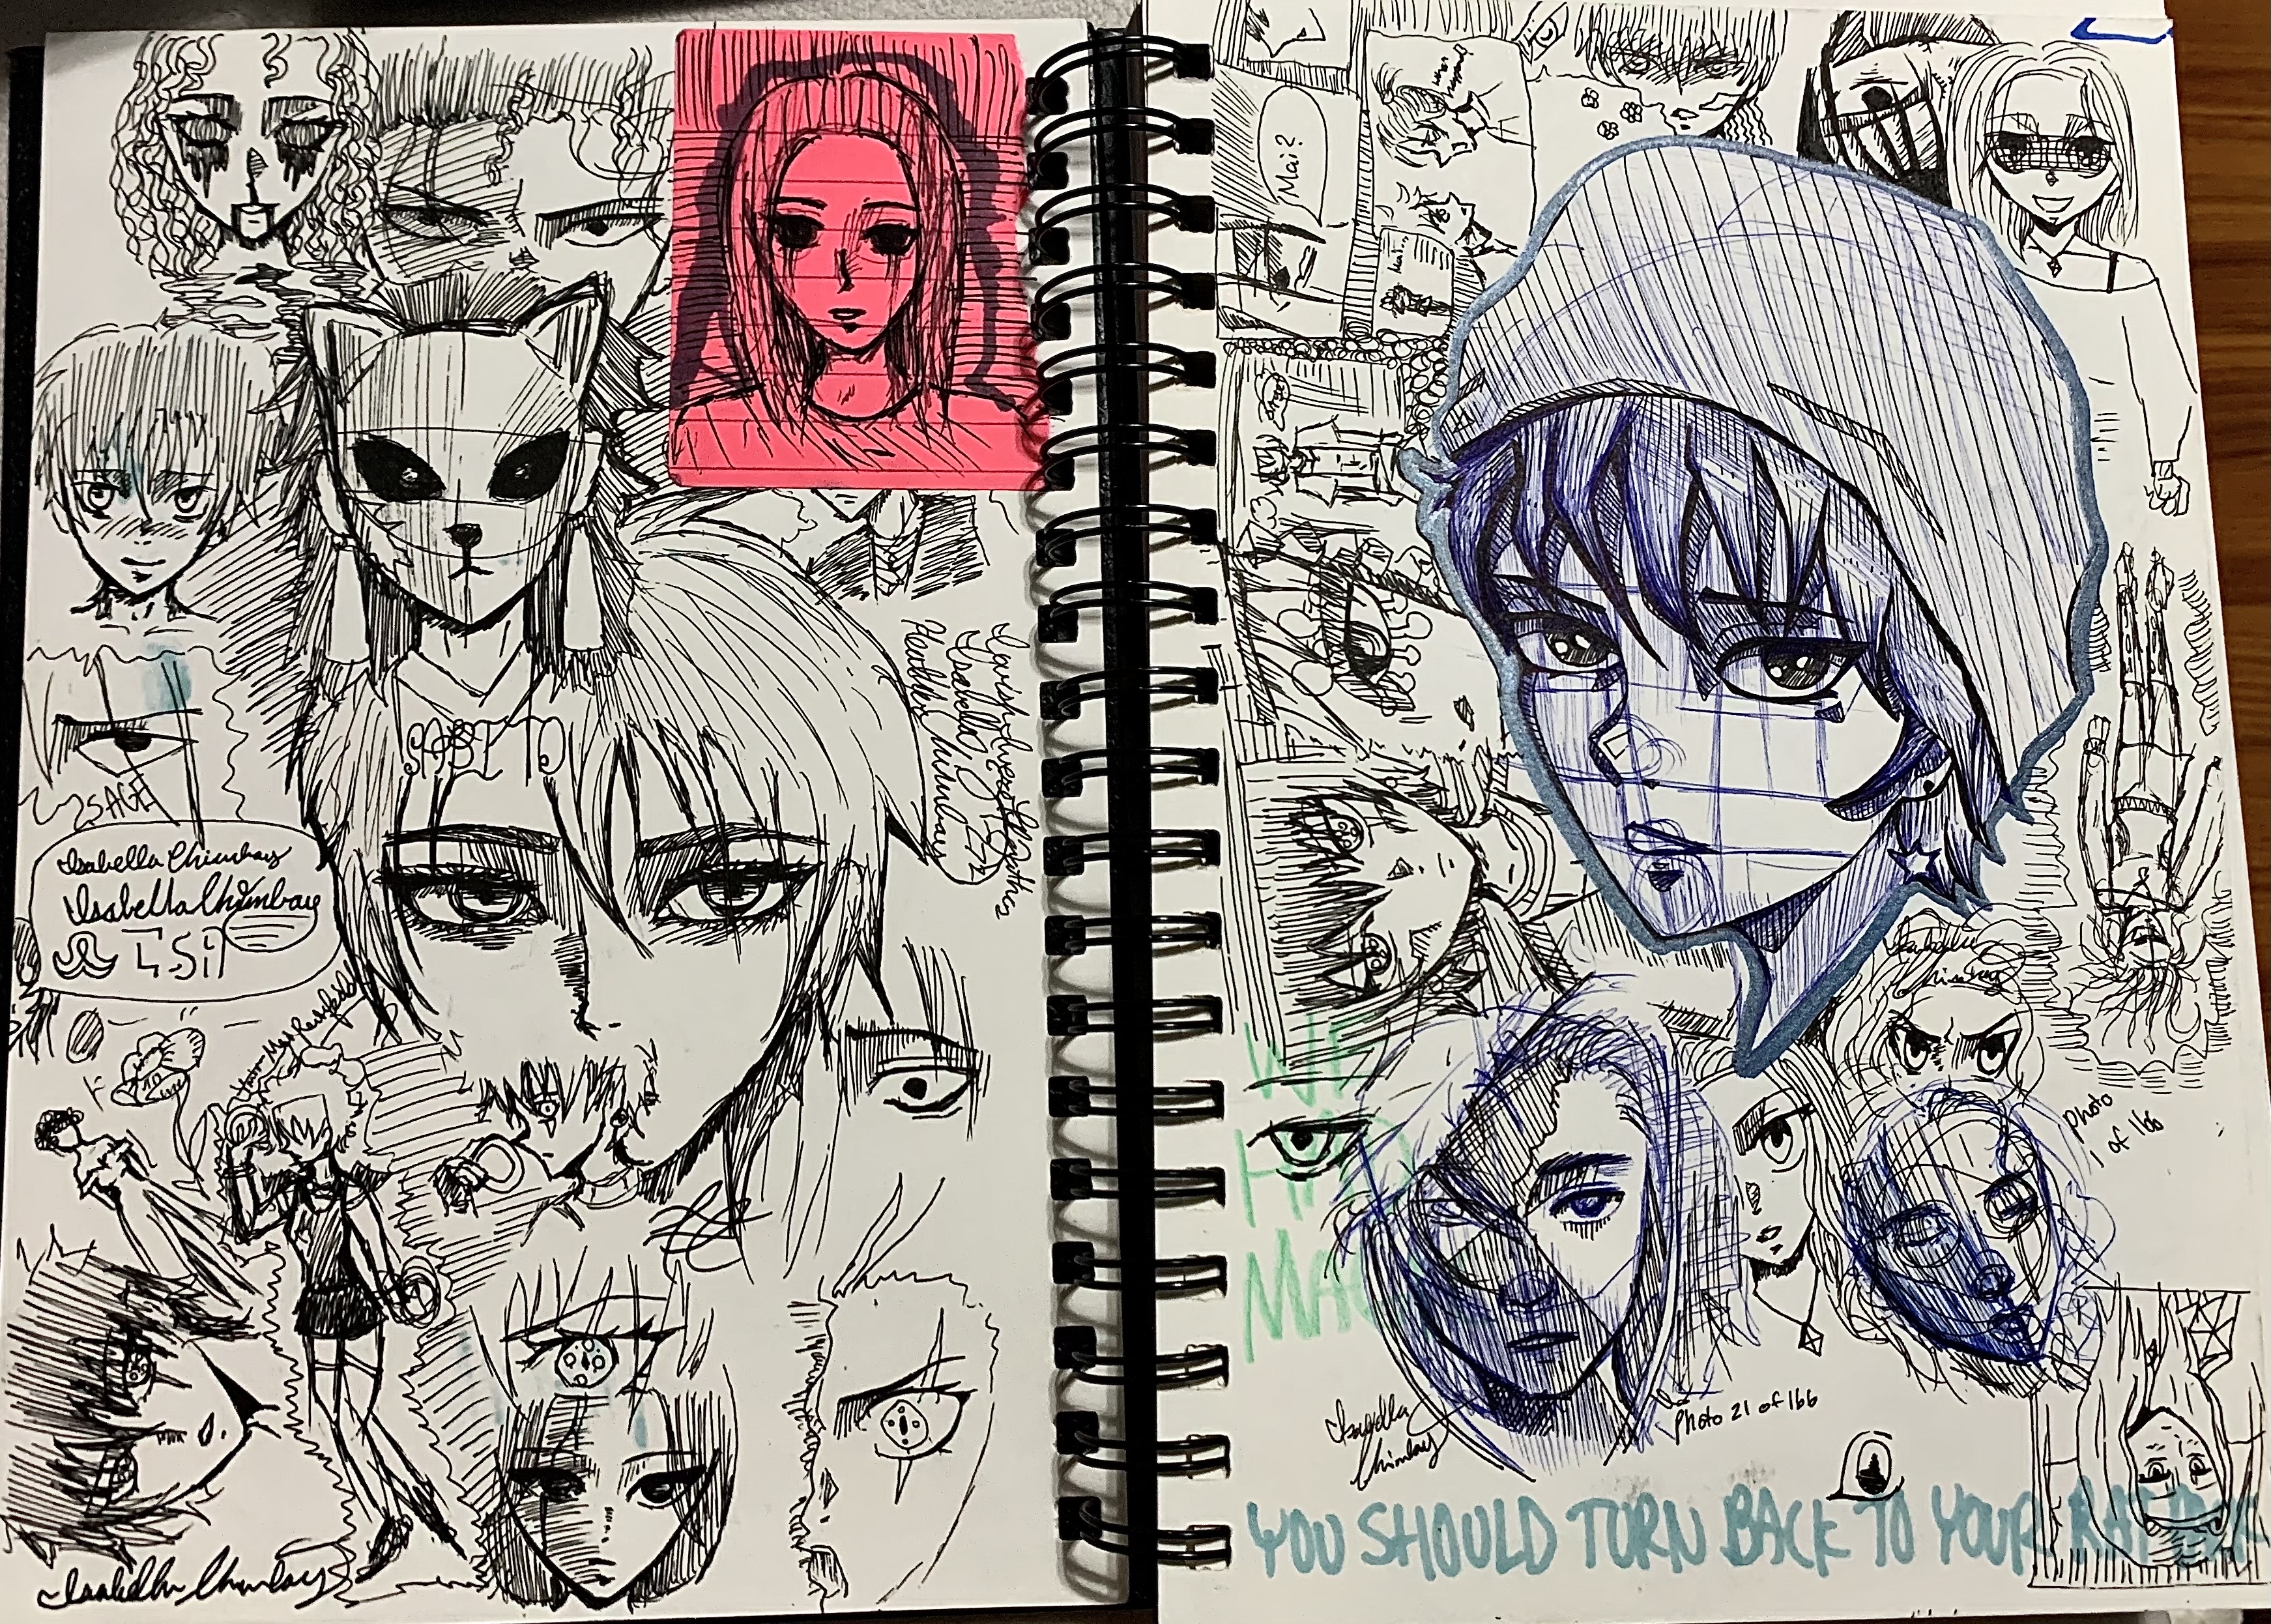 My journal is turning into my sketchbook… is this now an art